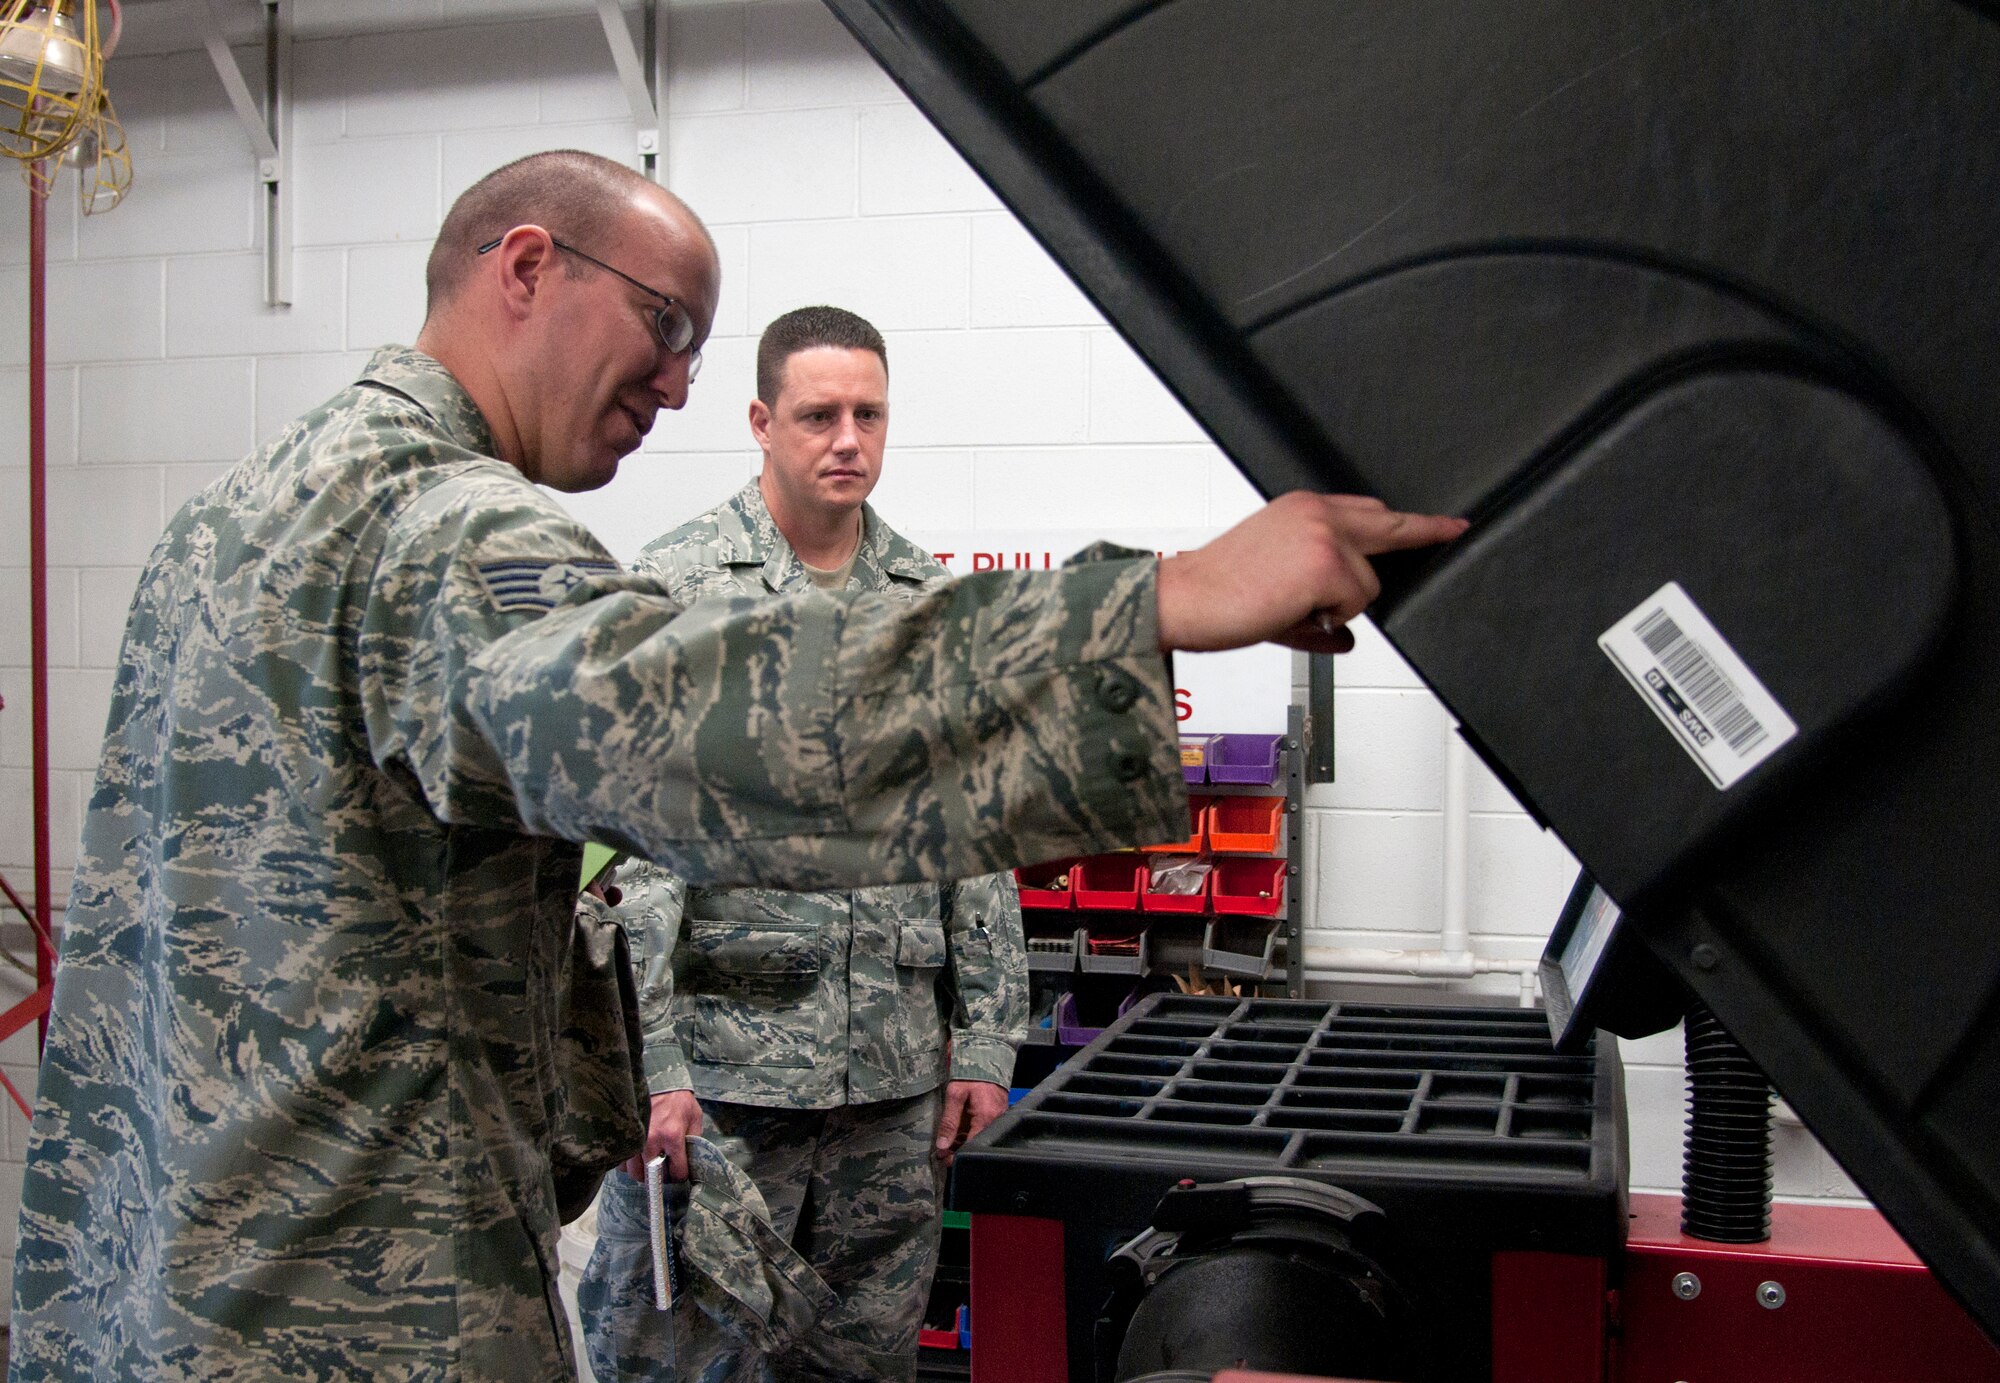 Staff Sgt. Philip Bolduc, 90th Logistics Readiness Squadron vehicle maintenance customer service NCOIC and safety representative, explains the 90th LRS tire balancer to Master Sgt. Michael Moriarty, 90th Missile Wing Safety Office ground safety superintendent, June 4, 2014, during the annual safety inspection of the 90th Logistics Readiness Squadron in the vehicle maintenance building. The focus of the inspection is to ensure the Airmen are safe in their working environment. (U.S. Air Force photo by Airman 1st Class Malcolm Mayfield)